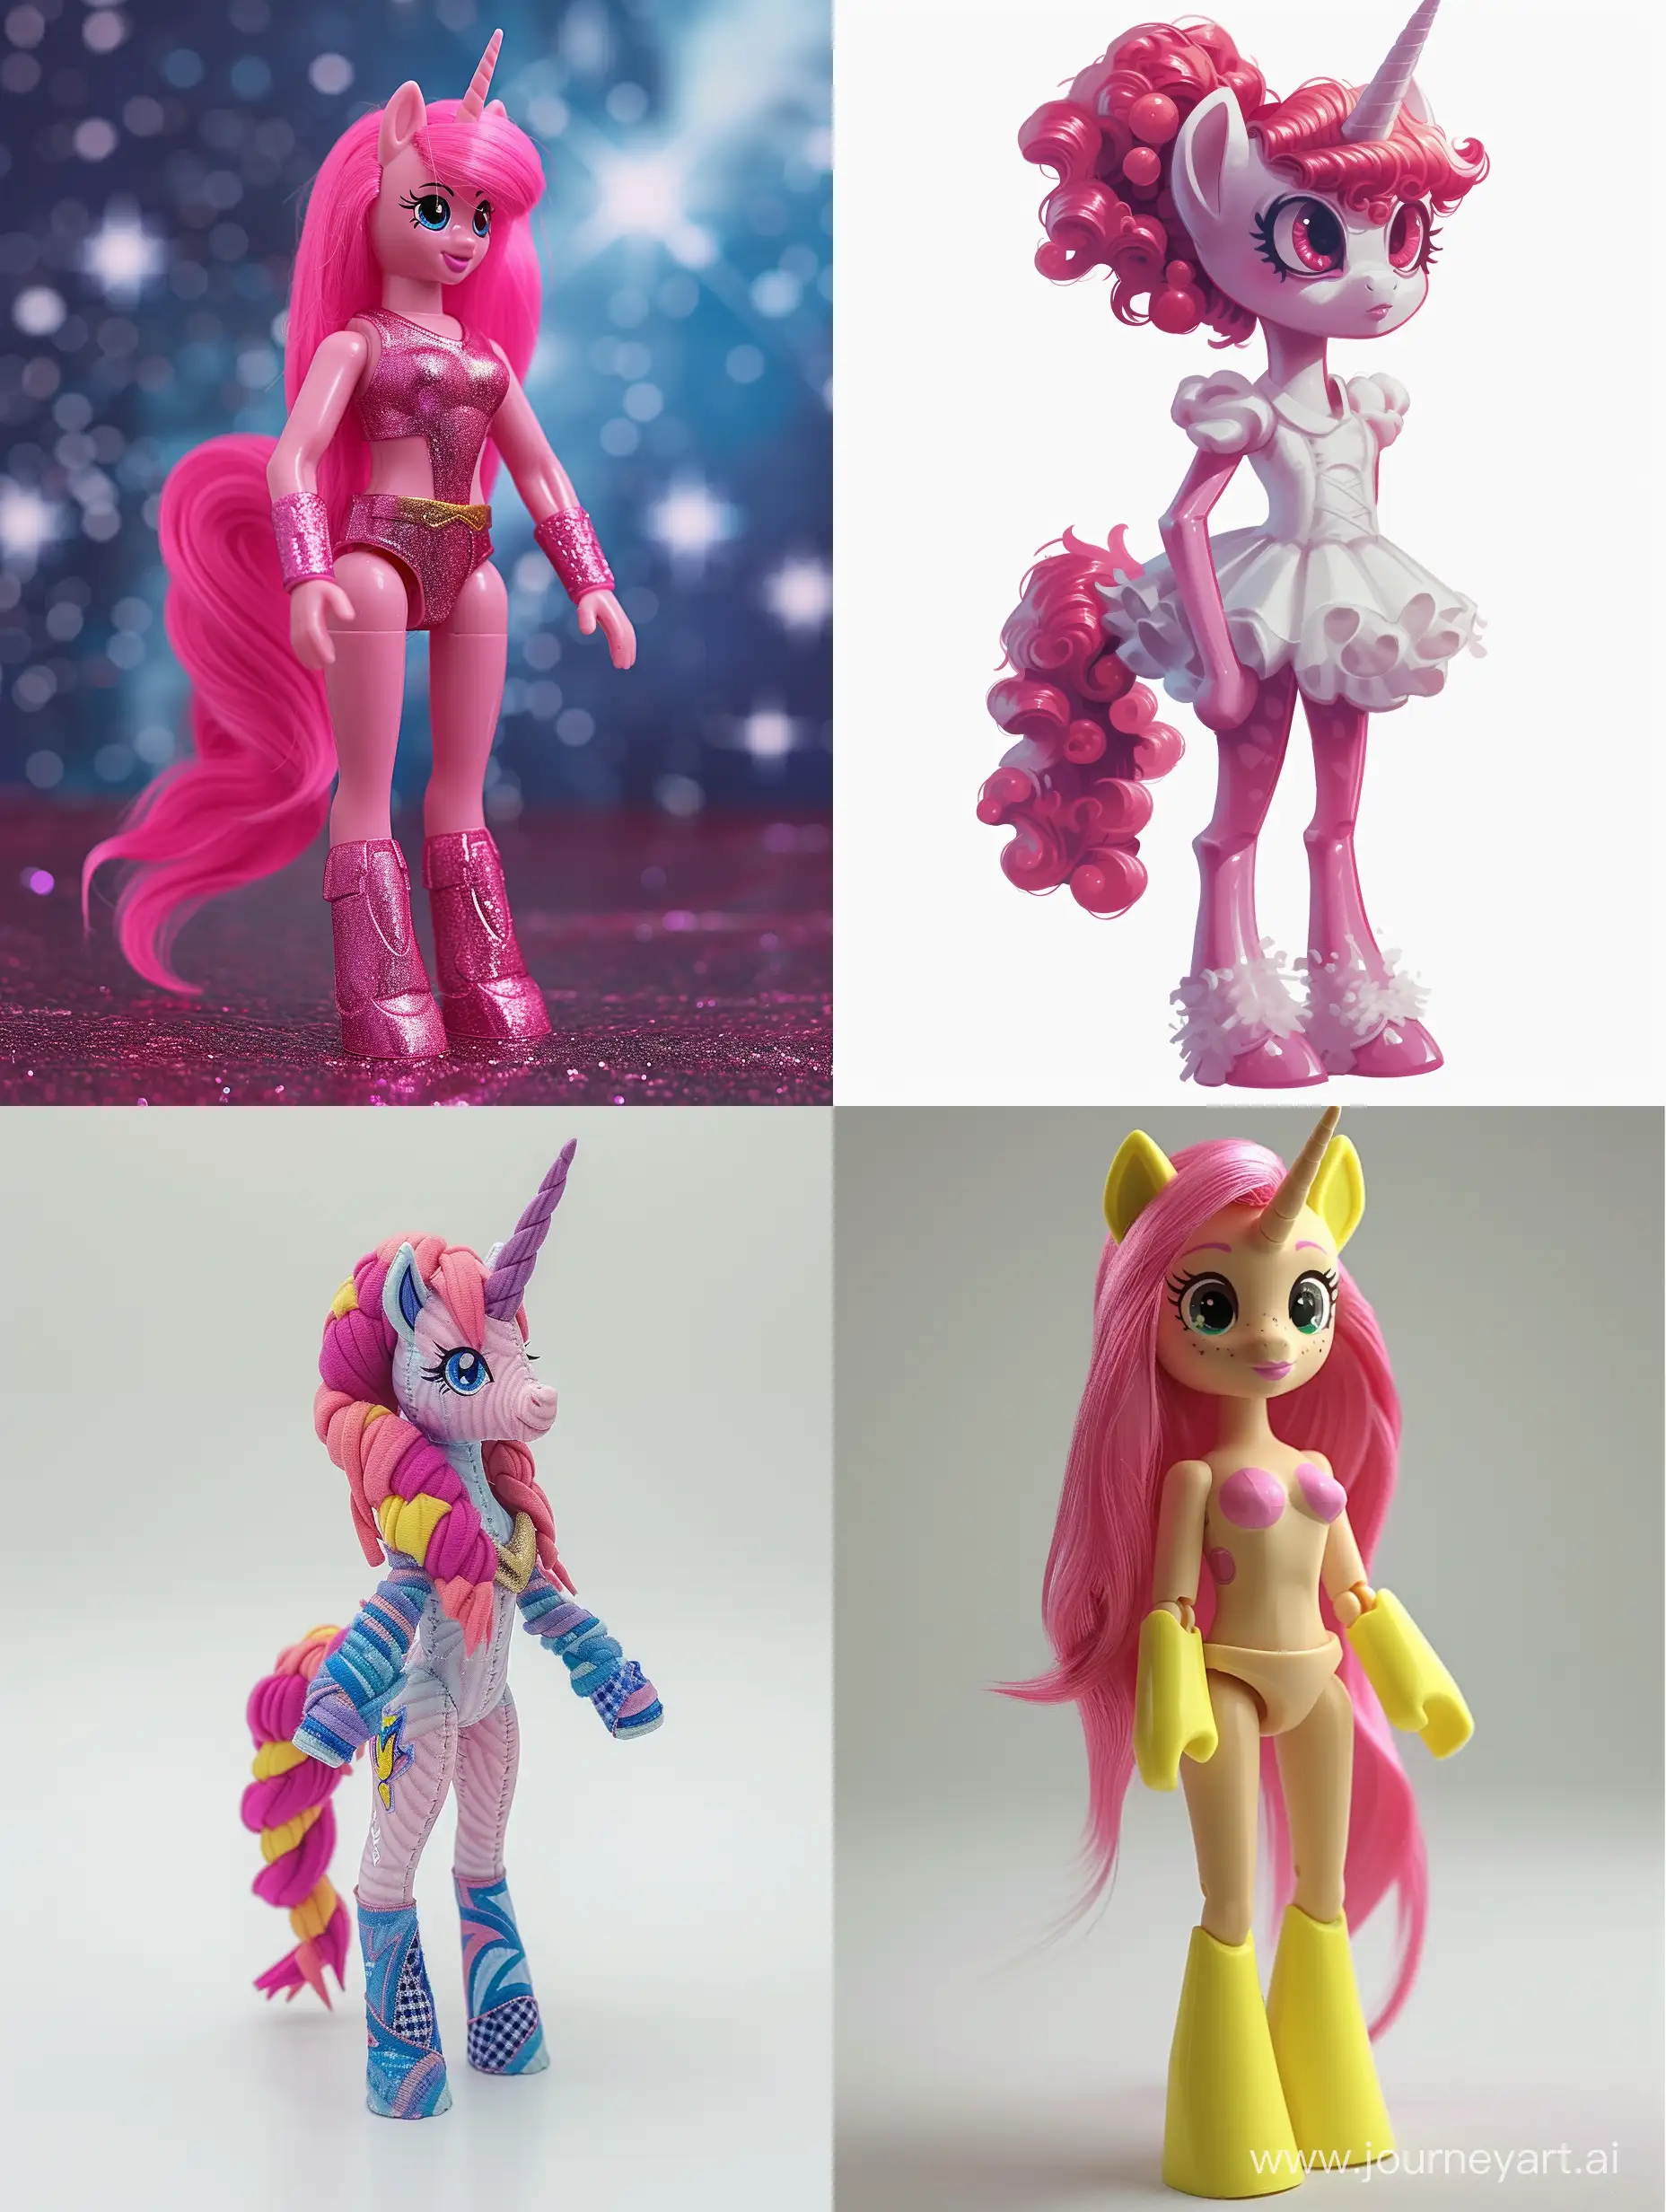 Whimsical-MLP-Style-Pony-with-Pink-Skin-in-Full-Height